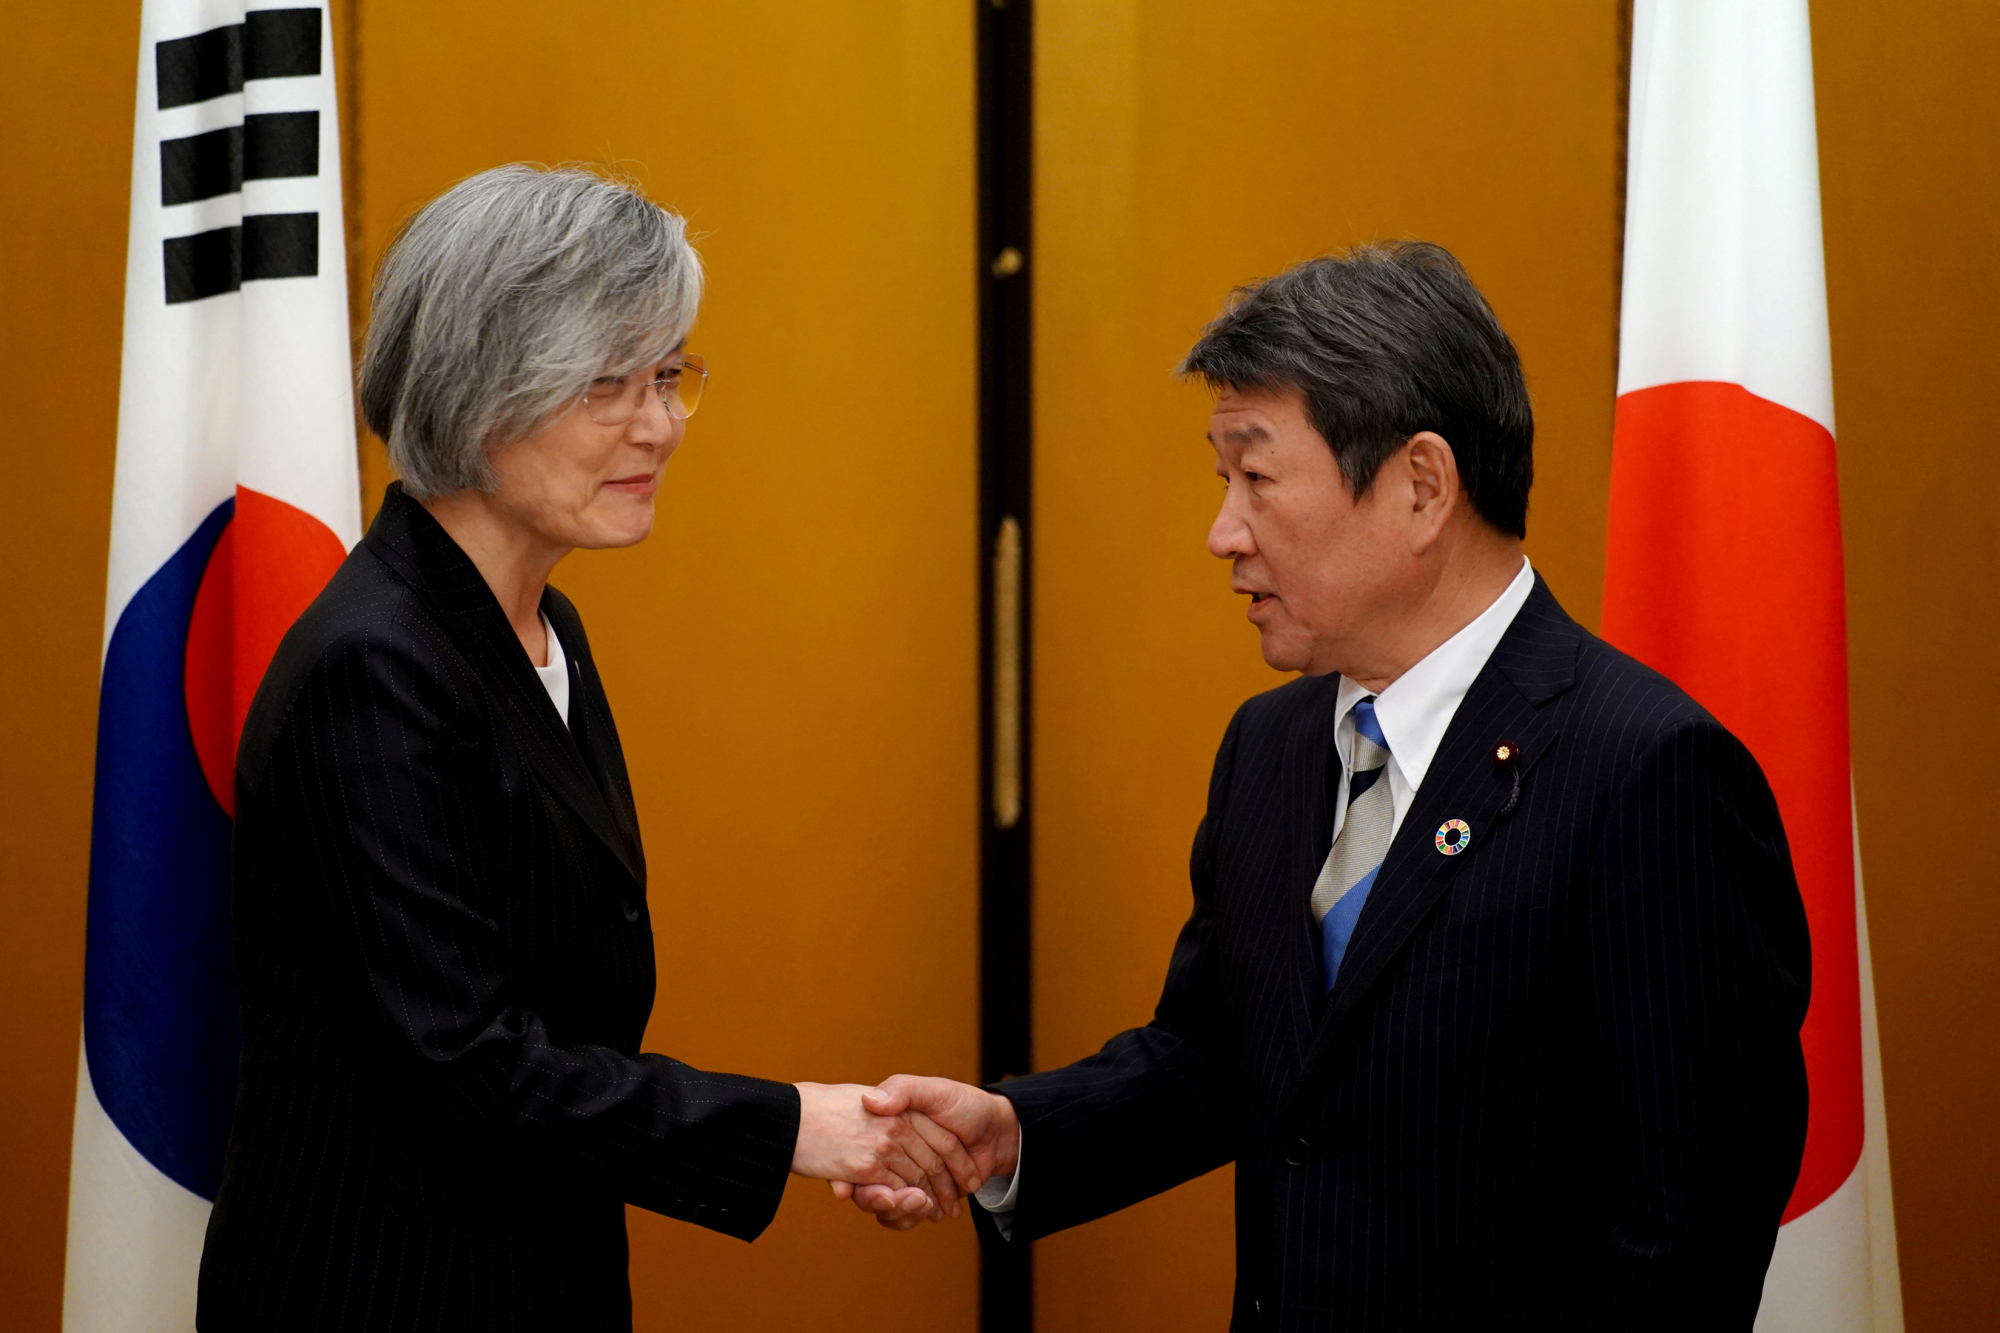 Foreign Minister Toshimitsu Motegi greets his South Korean counterpart, Kang Kyung-wha, after a G20 foreign ministers' meeting in Nagoya on Saturday. | REUTERS